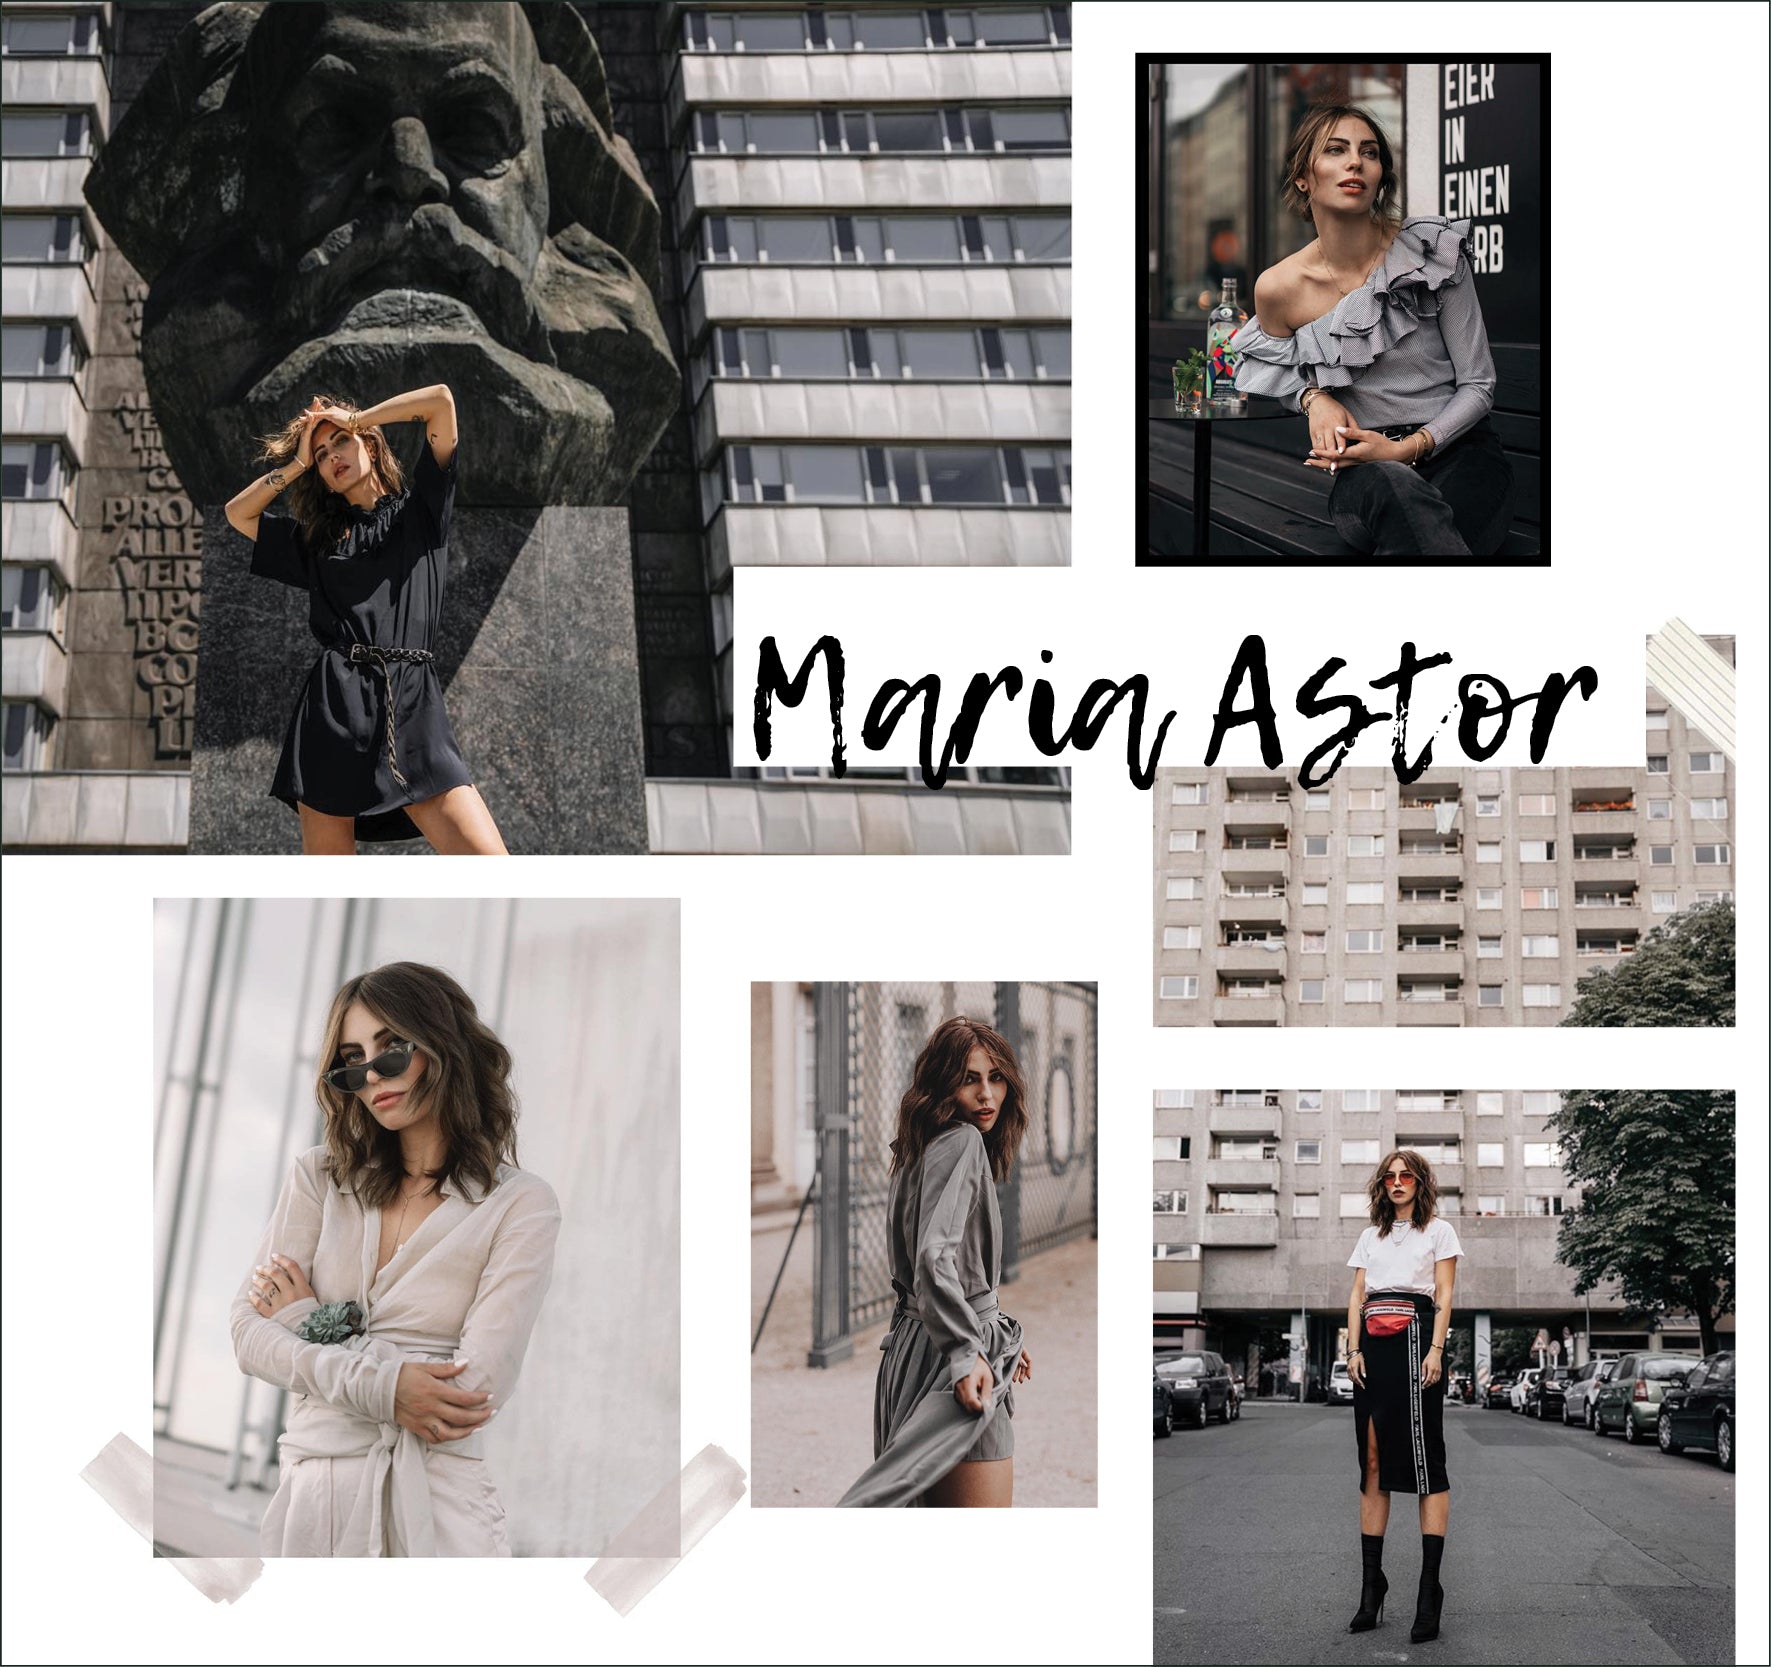 Maria Astor instagram images collage design as style icon muse featured on ownmuse.com